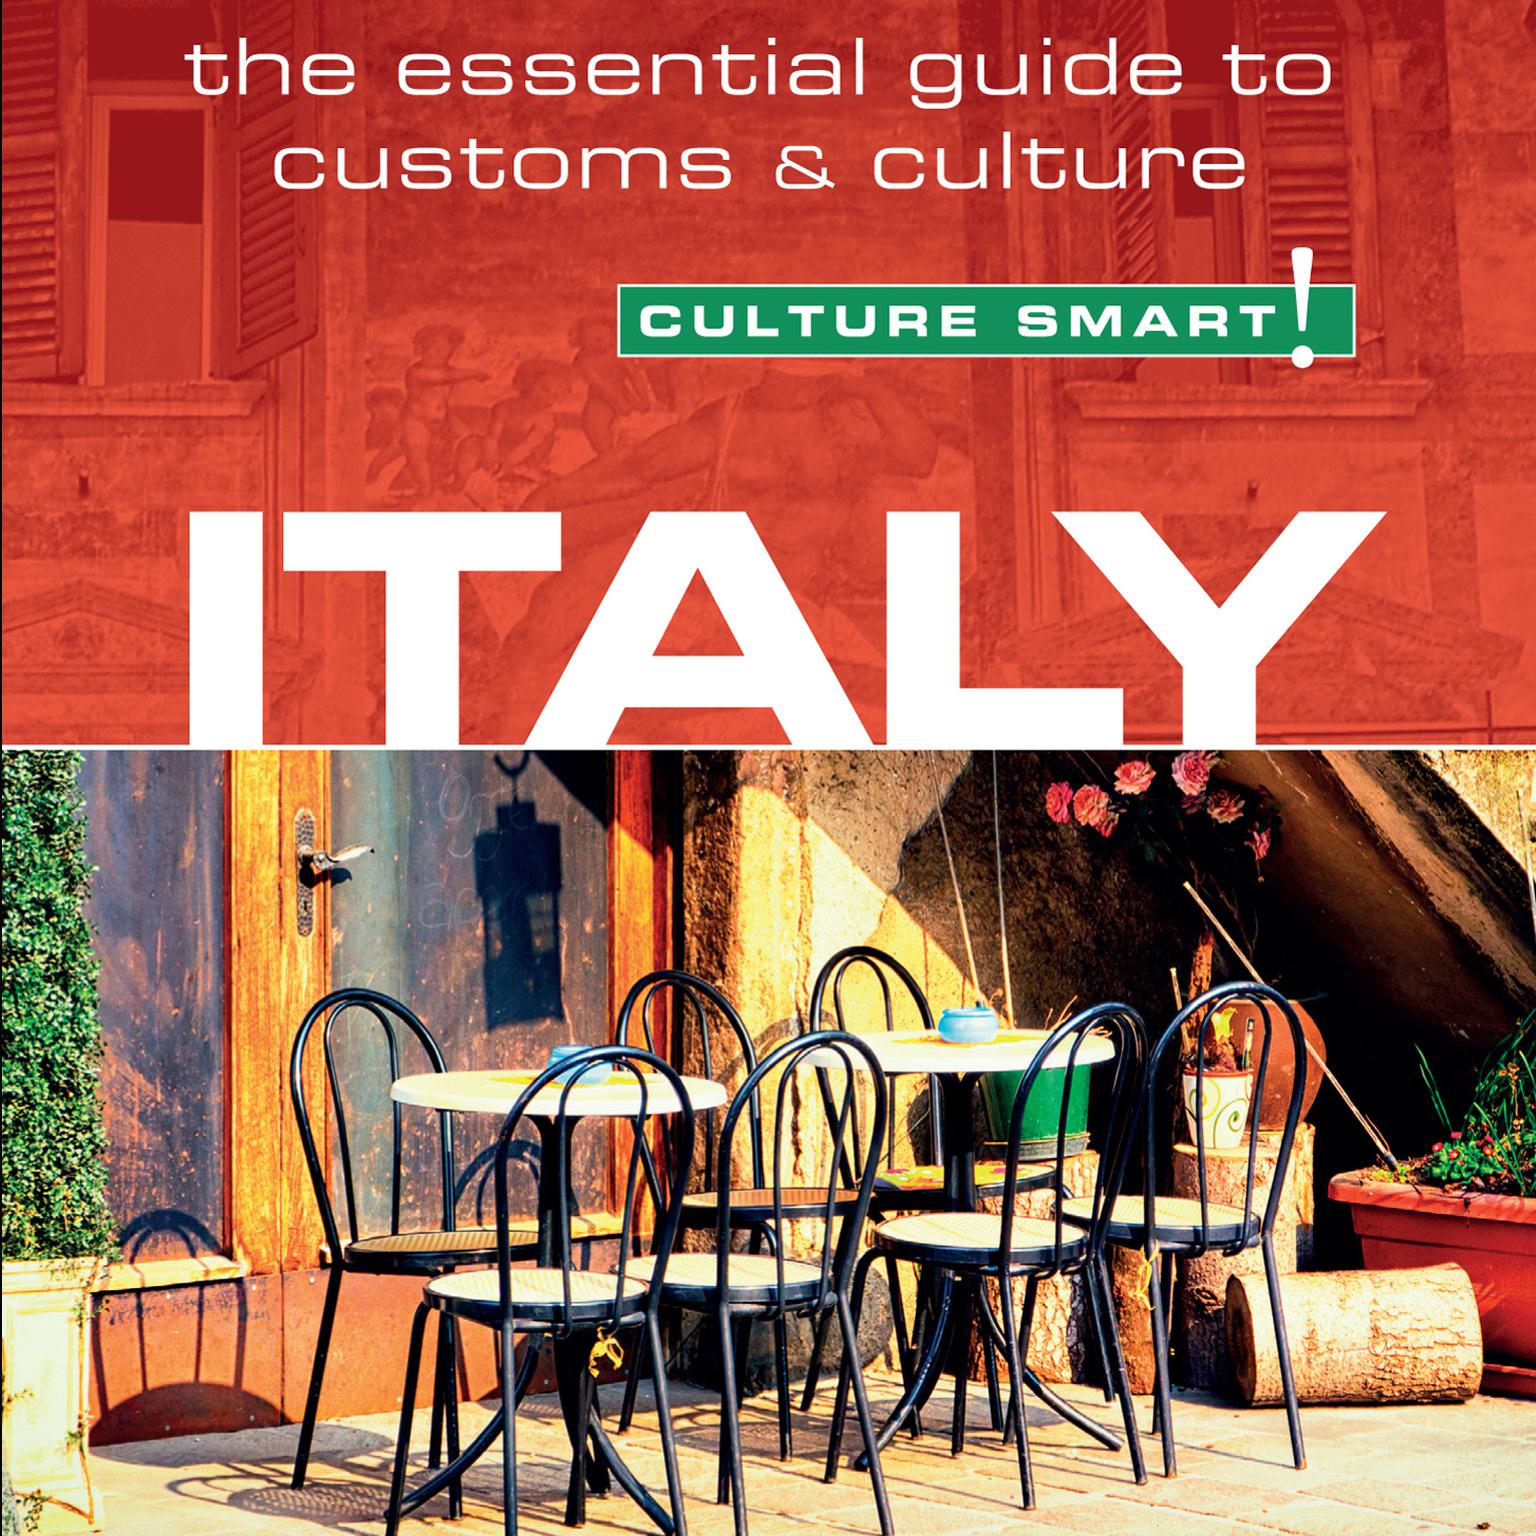 Italy - Culture Smart!: The Essential Guide to Customs & Culture: The Essential Guide to Customs & Culture Audiobook, by Barry Tomalin